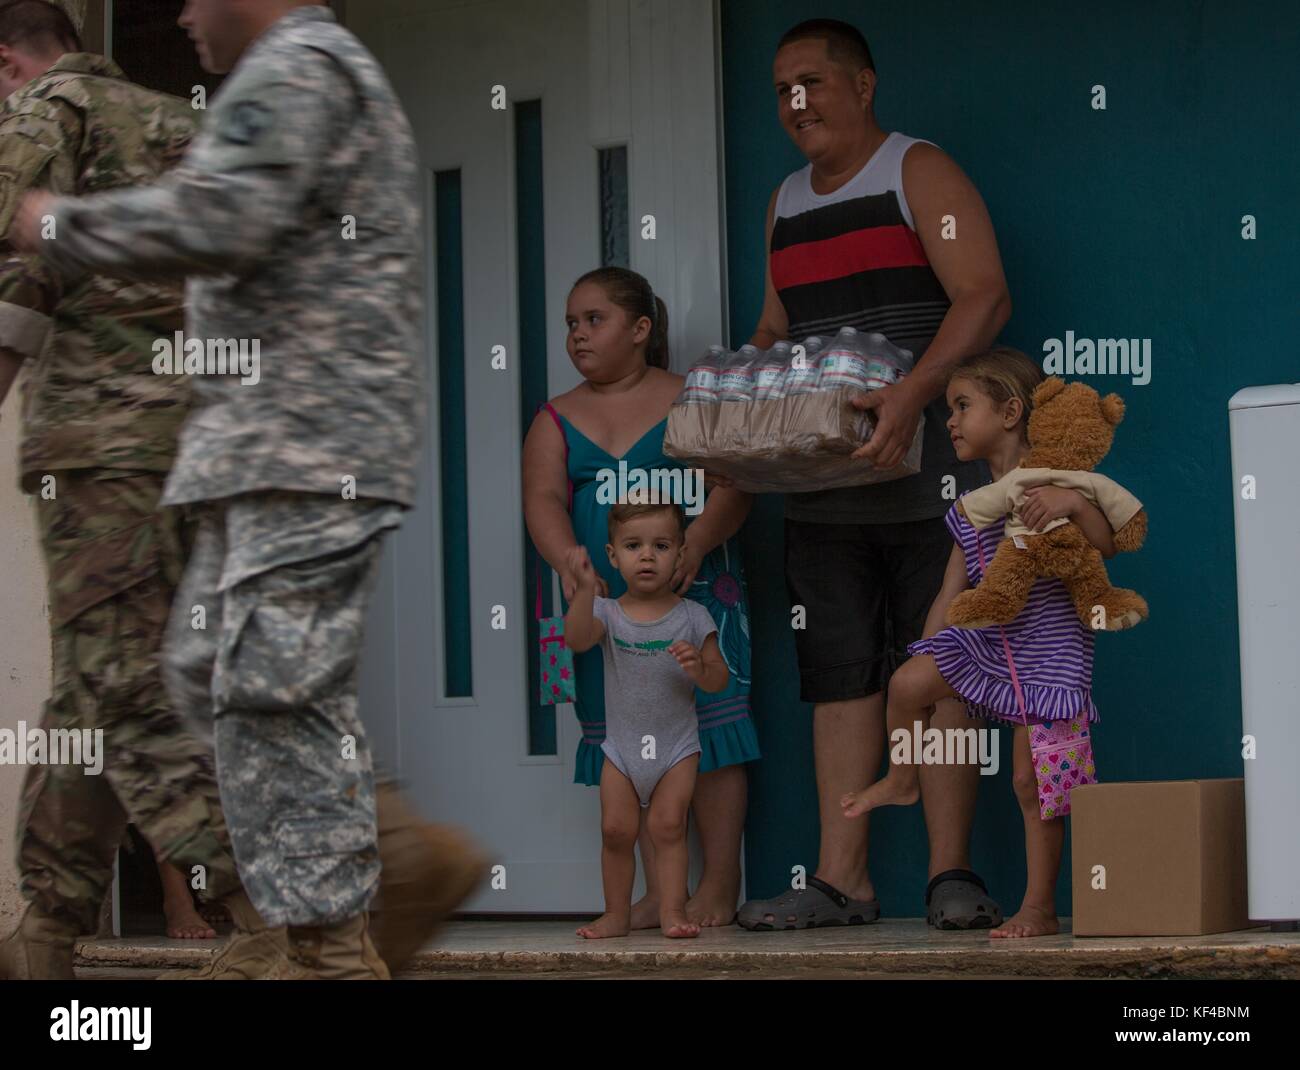 U.S. Army soldiers deliver emergency supplies to stranded Puerto Rican residents in the aftermath of Hurricane Maria October 9, 2017 in Indiera Baja, Puerto Rico. The residents were isolated due to landslides and flooding. Stock Photo